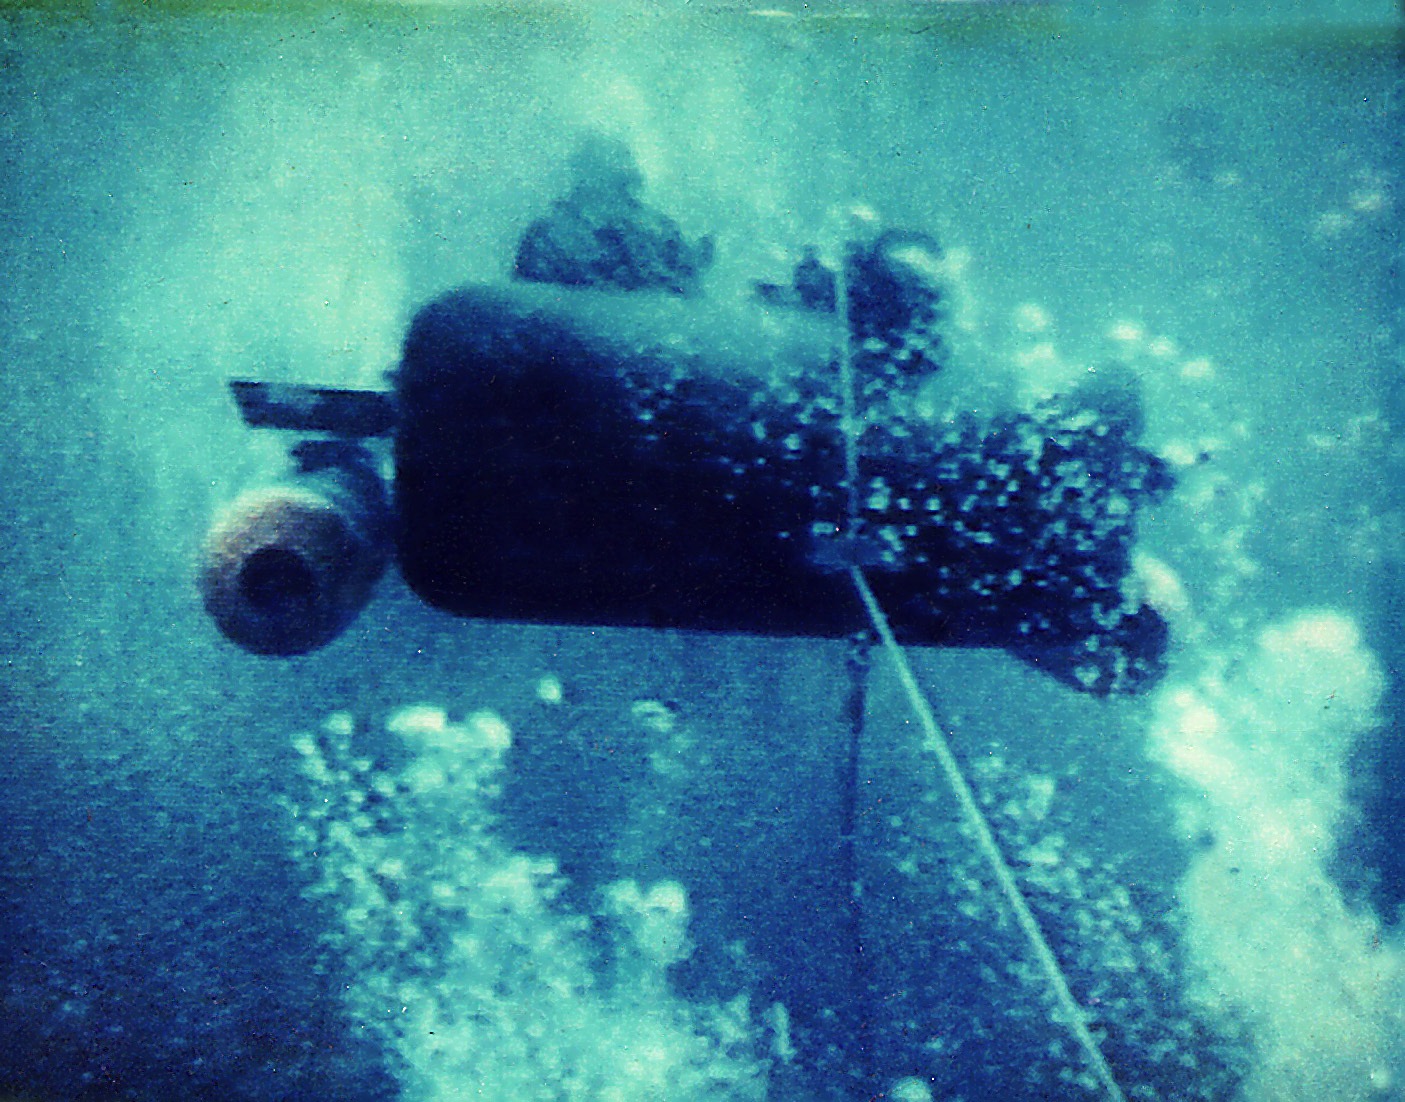 A MK IX SDV being launched from the deck of a submarine with the SWA